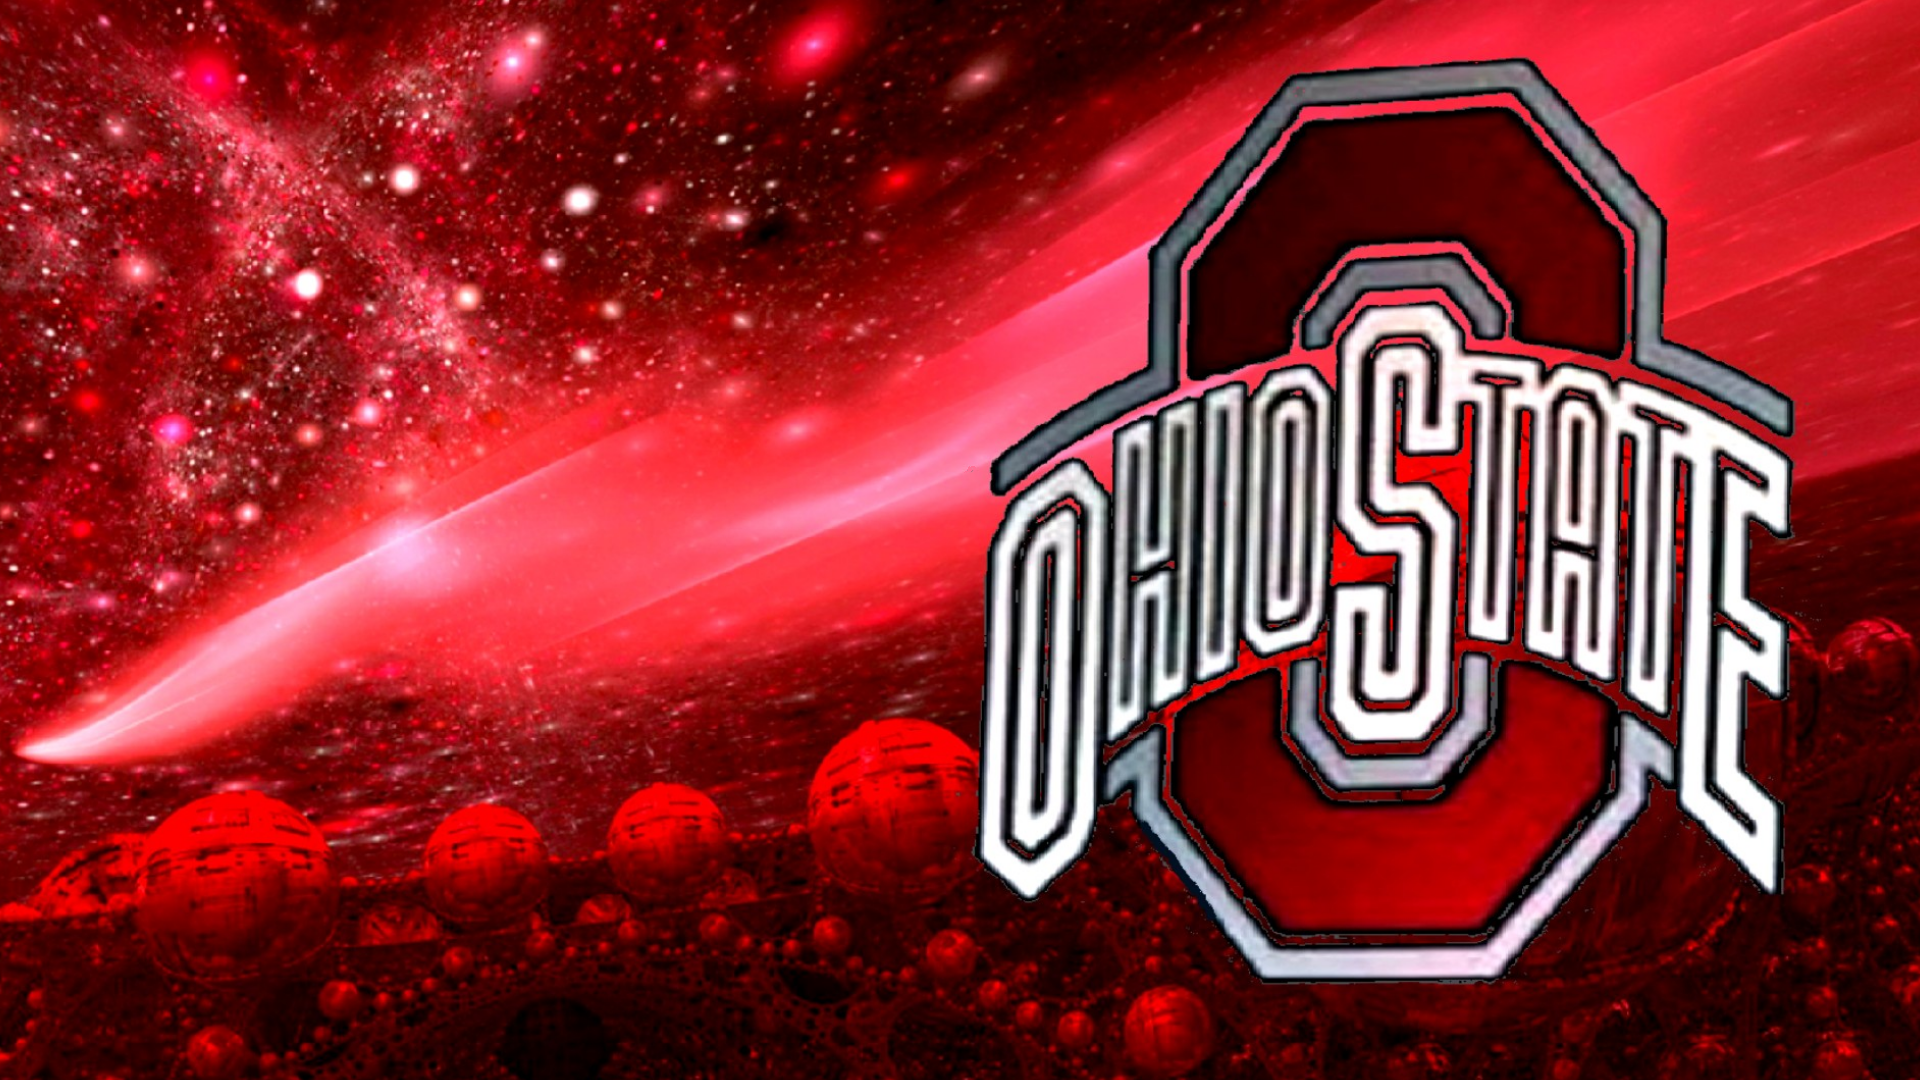 With Mandelbulb 3d Ohio State Football Wallpaper